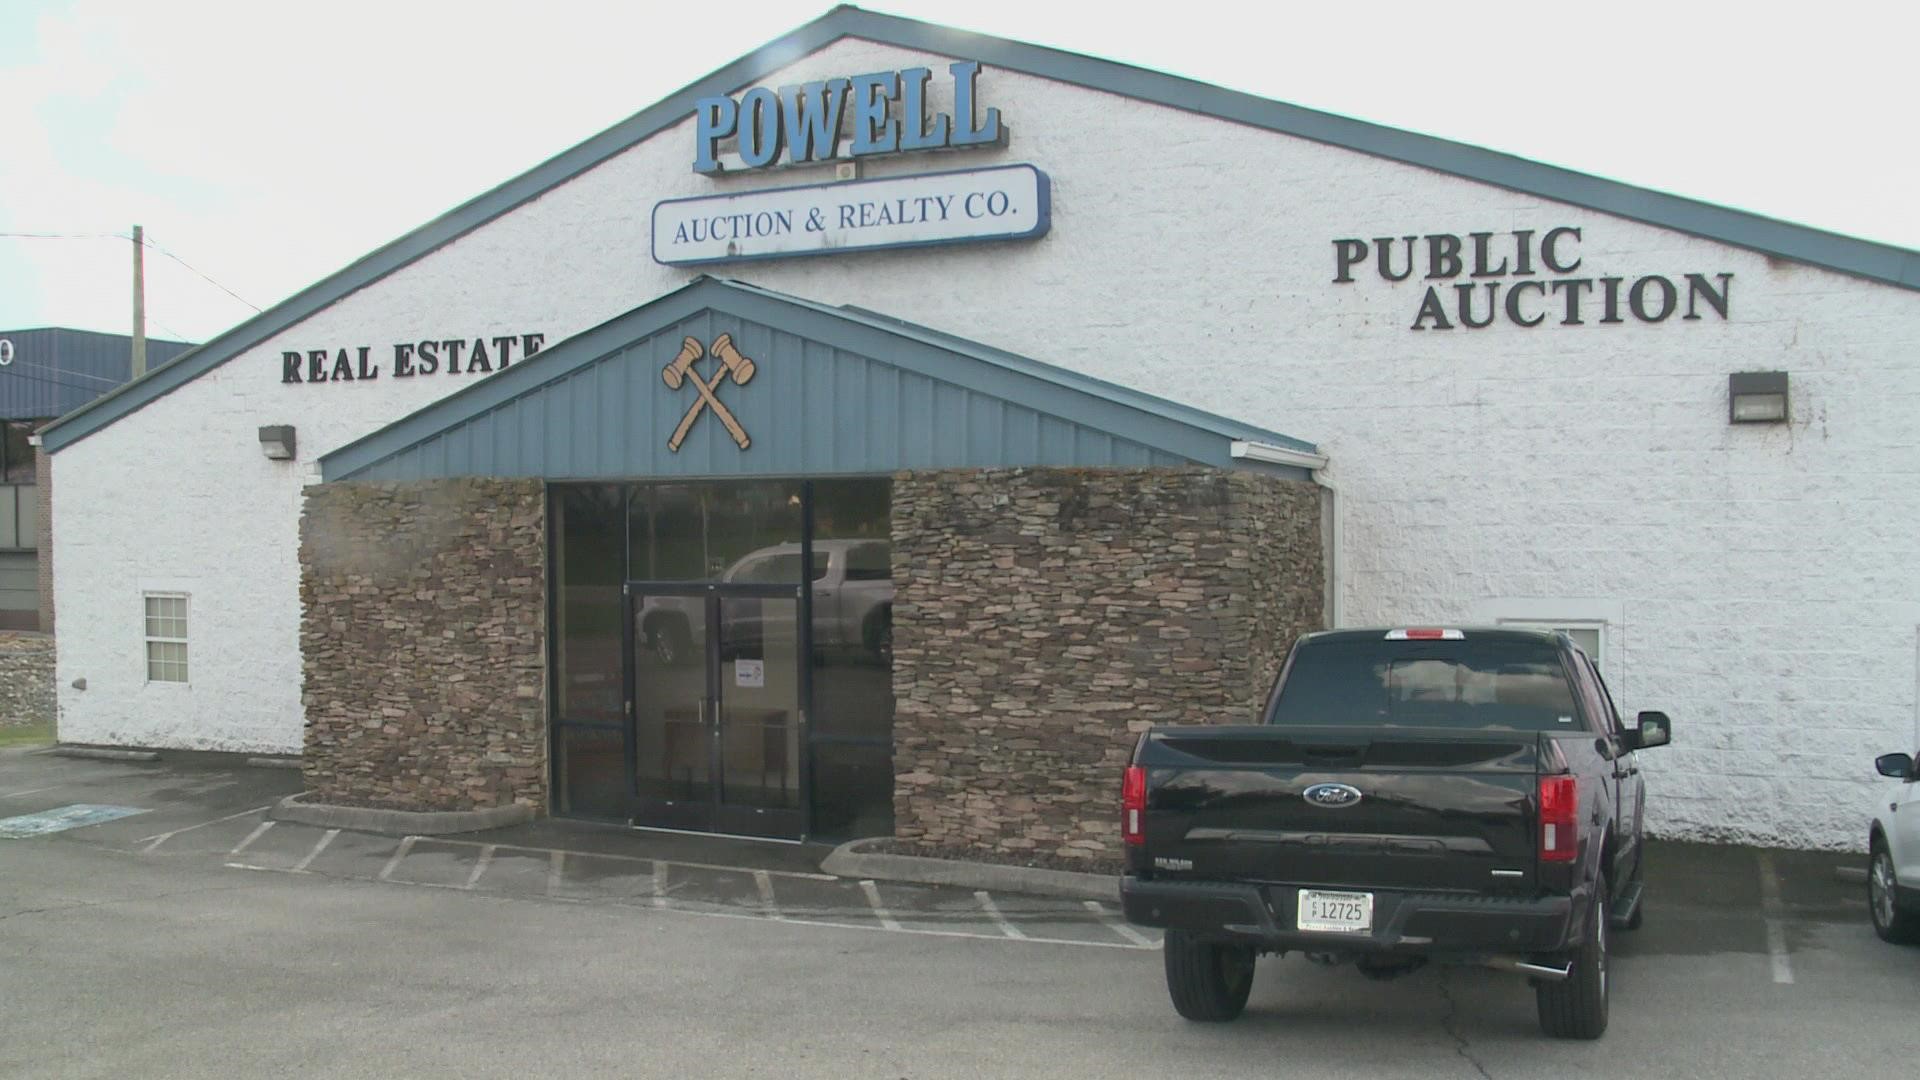 A ransomware attack froze local companies and auction houses, including Powell Auction.